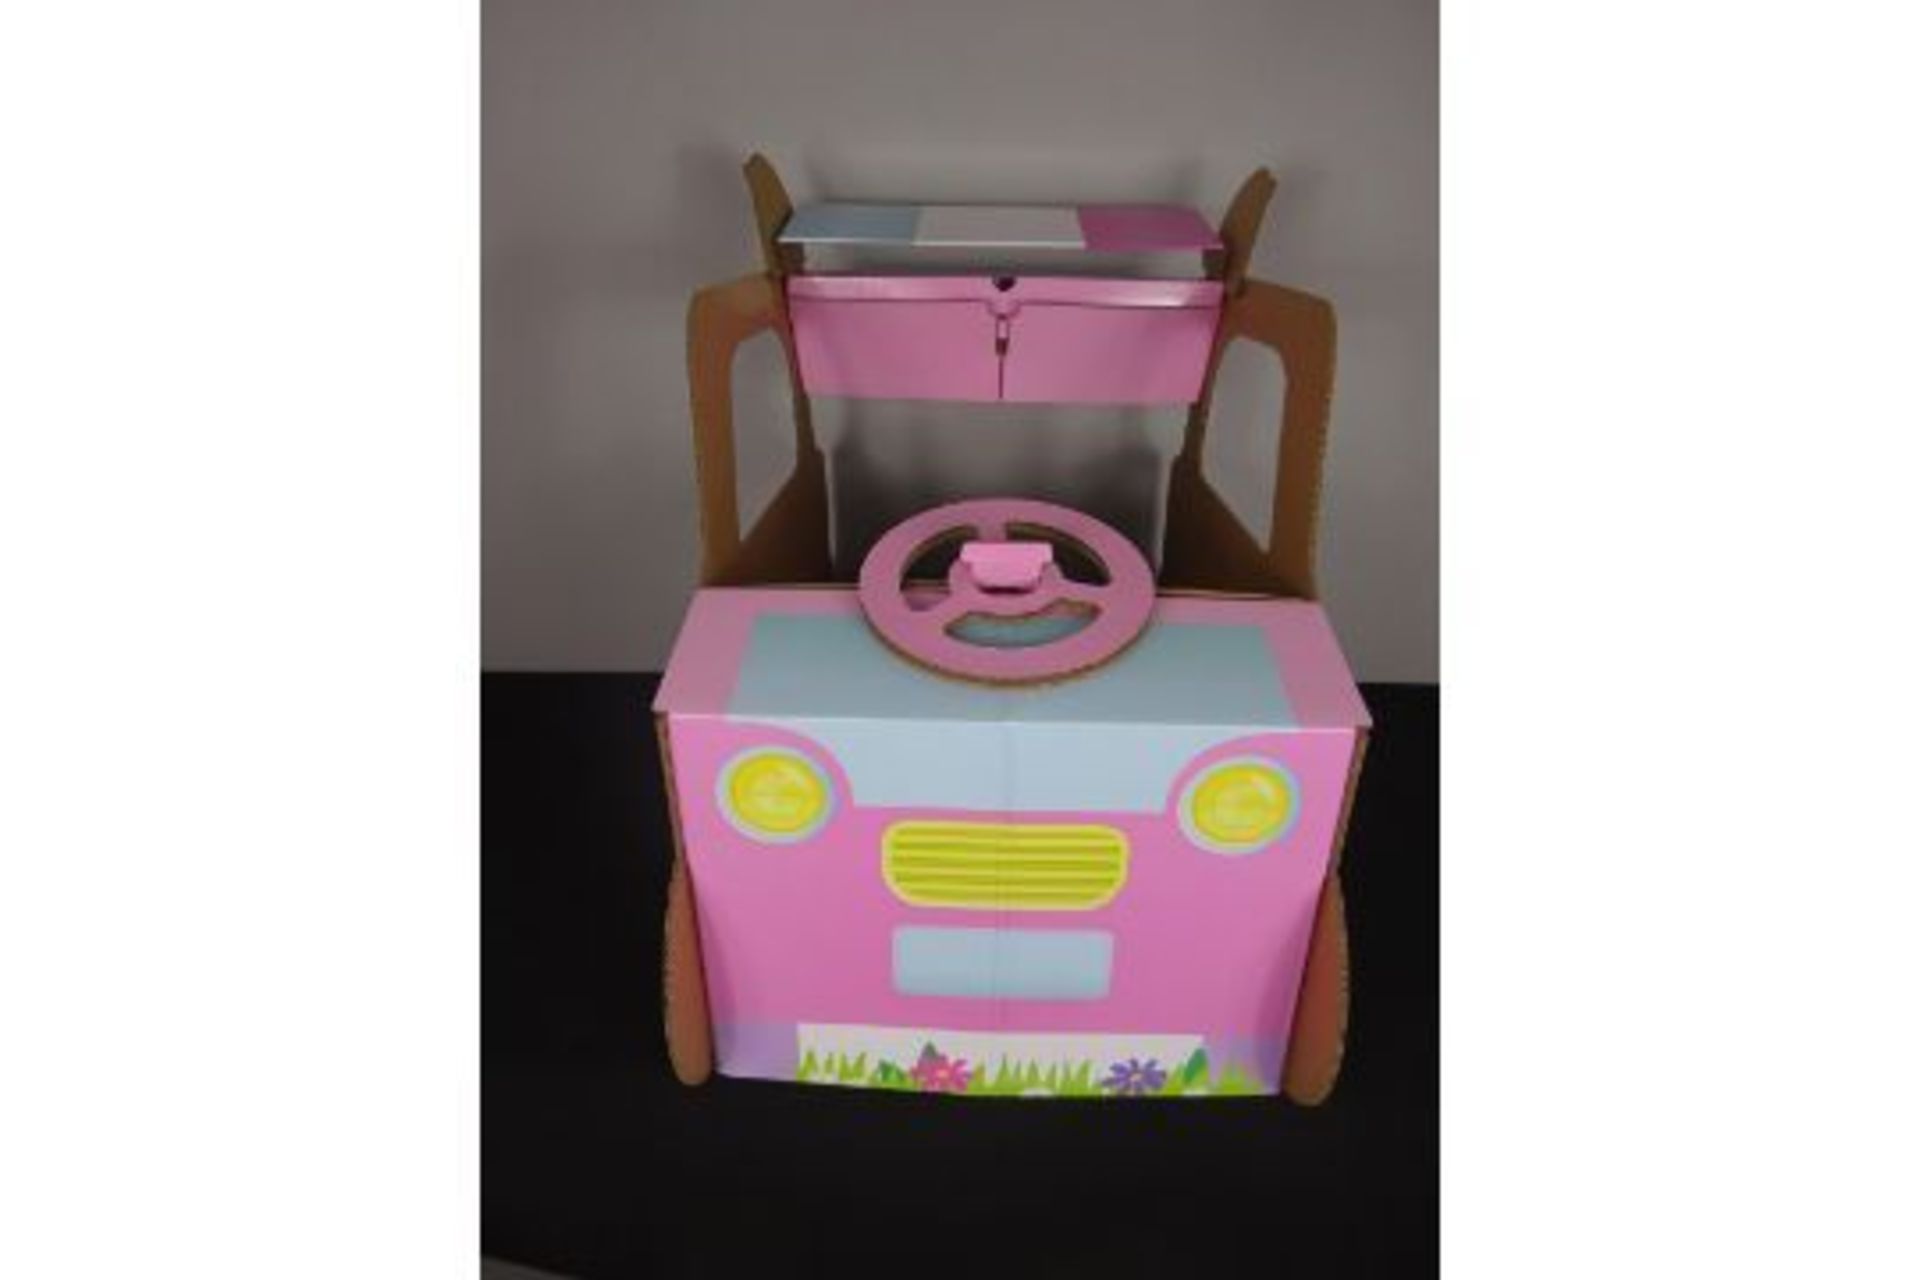 NEW LARGE MAKE YOUR OWN PINK CARDBOARD CAR - Image 2 of 2